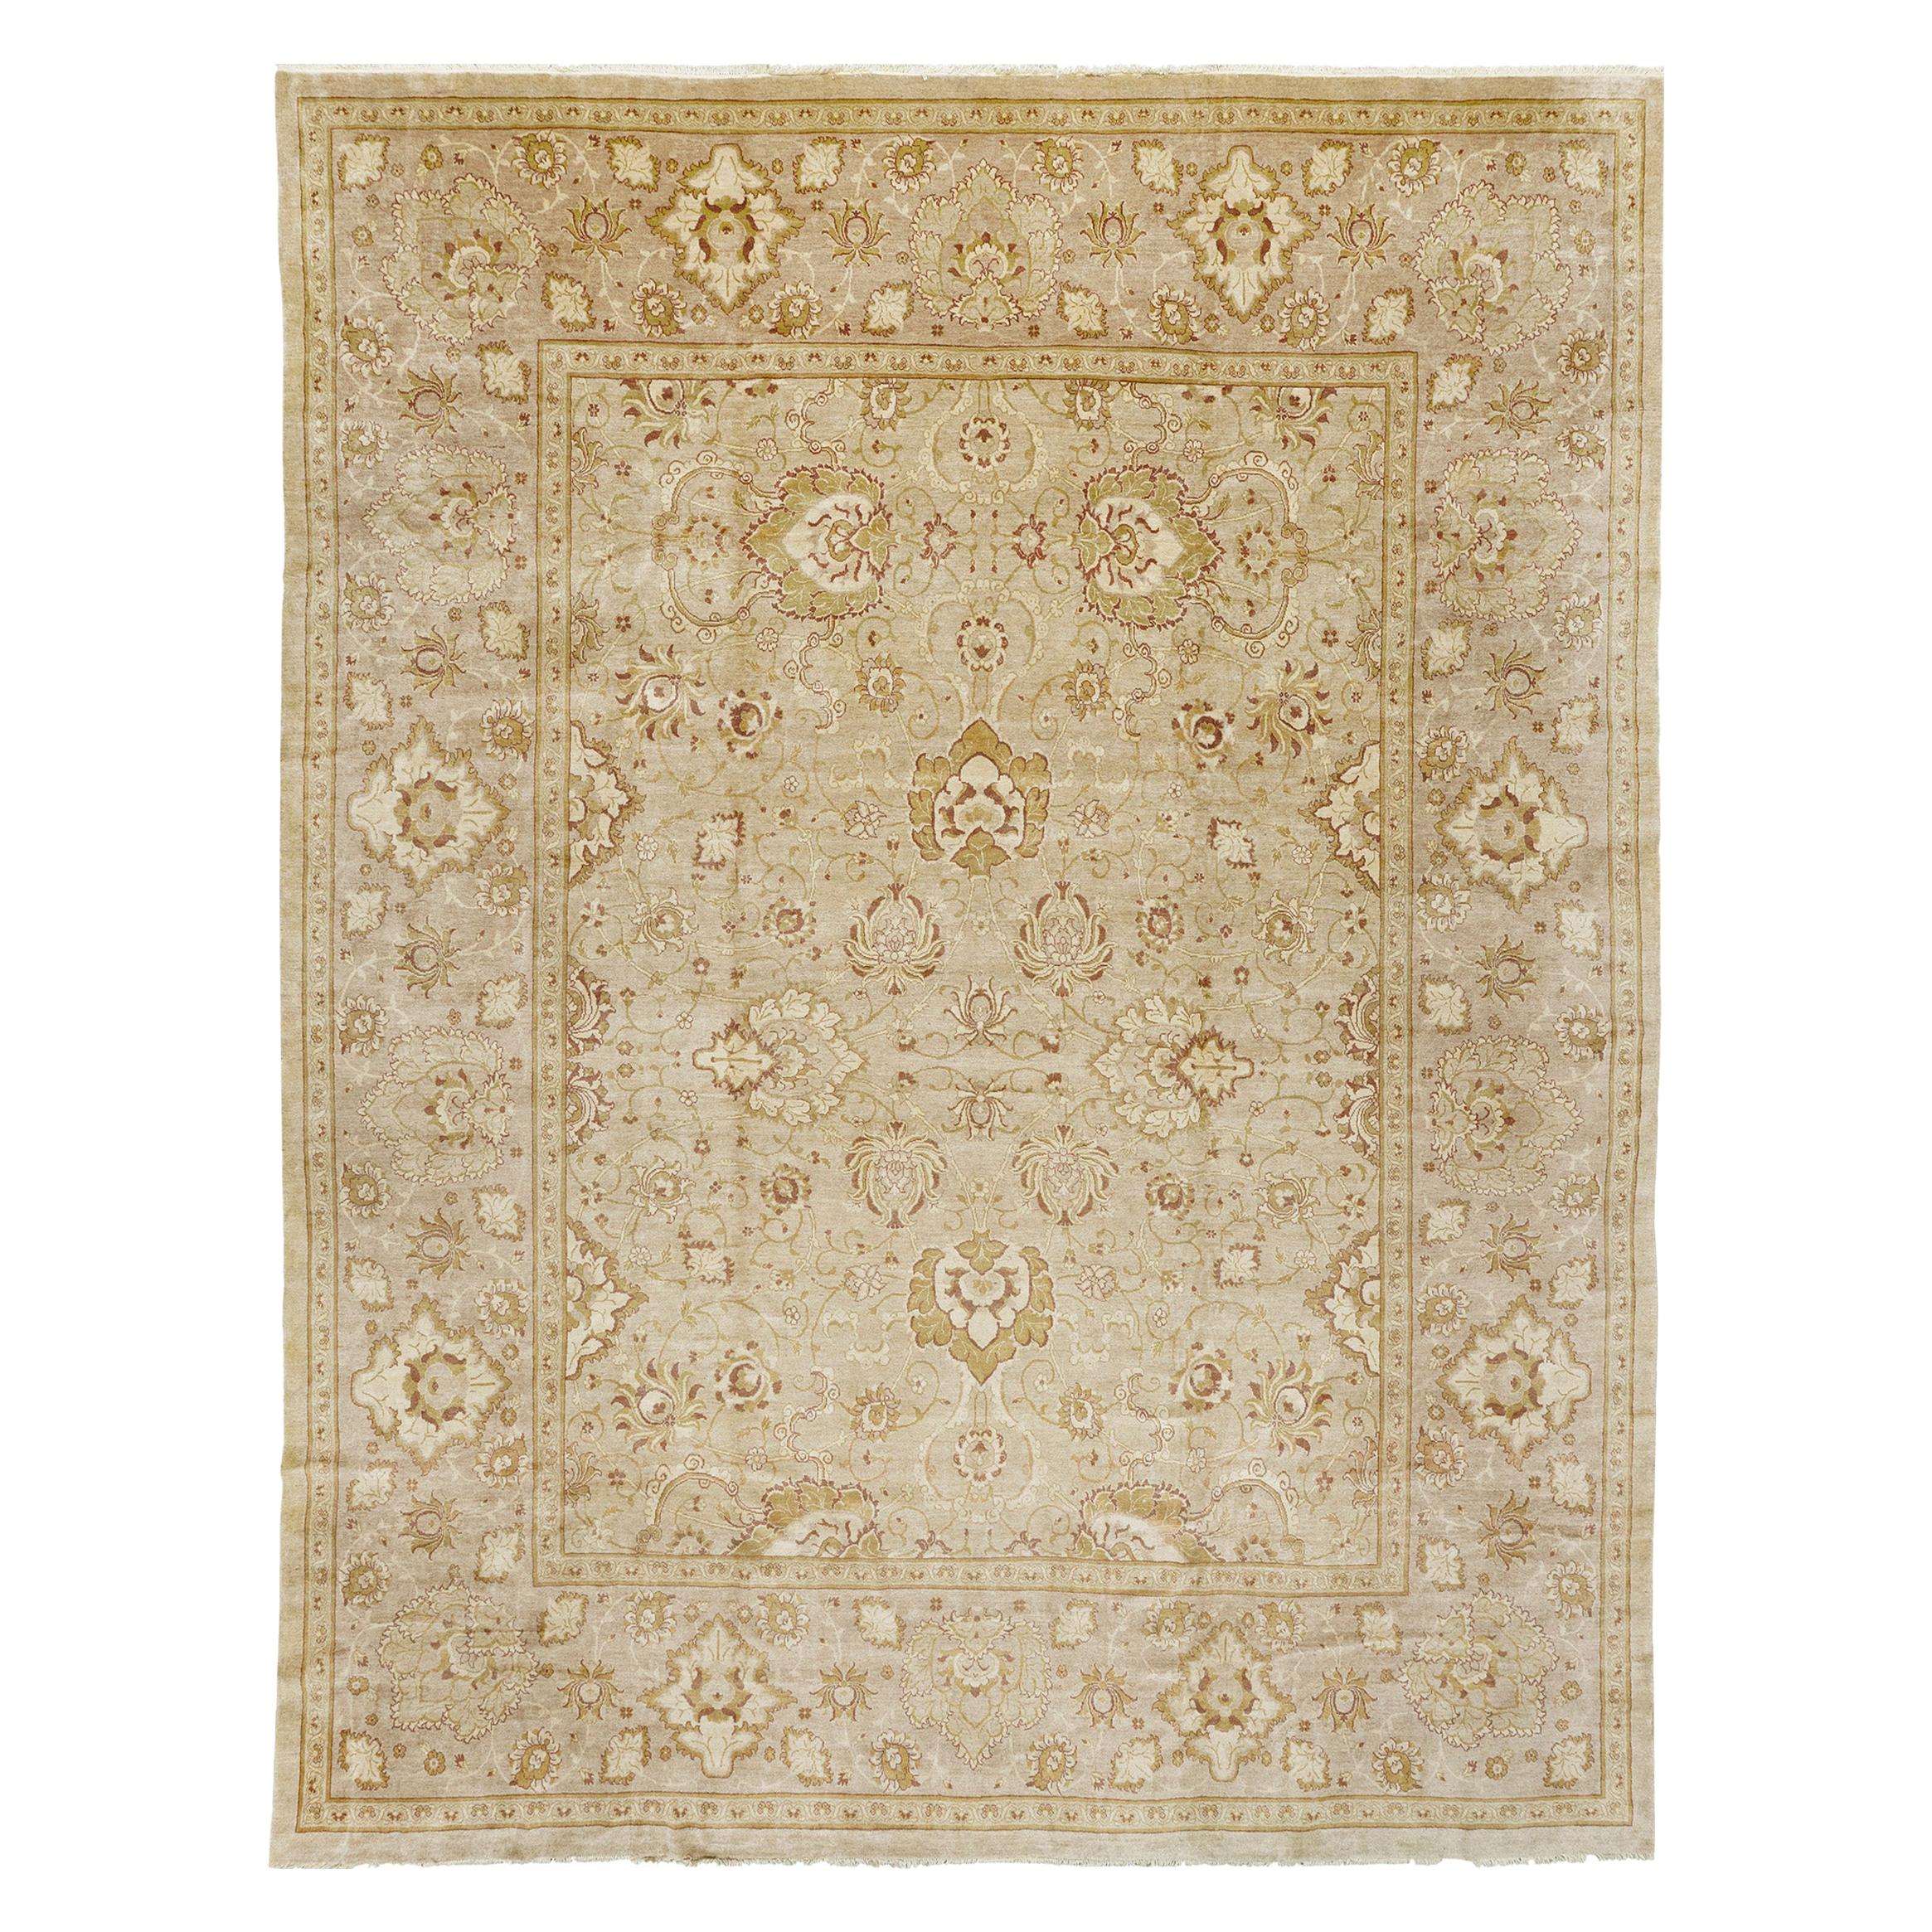 Natural Dye Sultanabad Rug